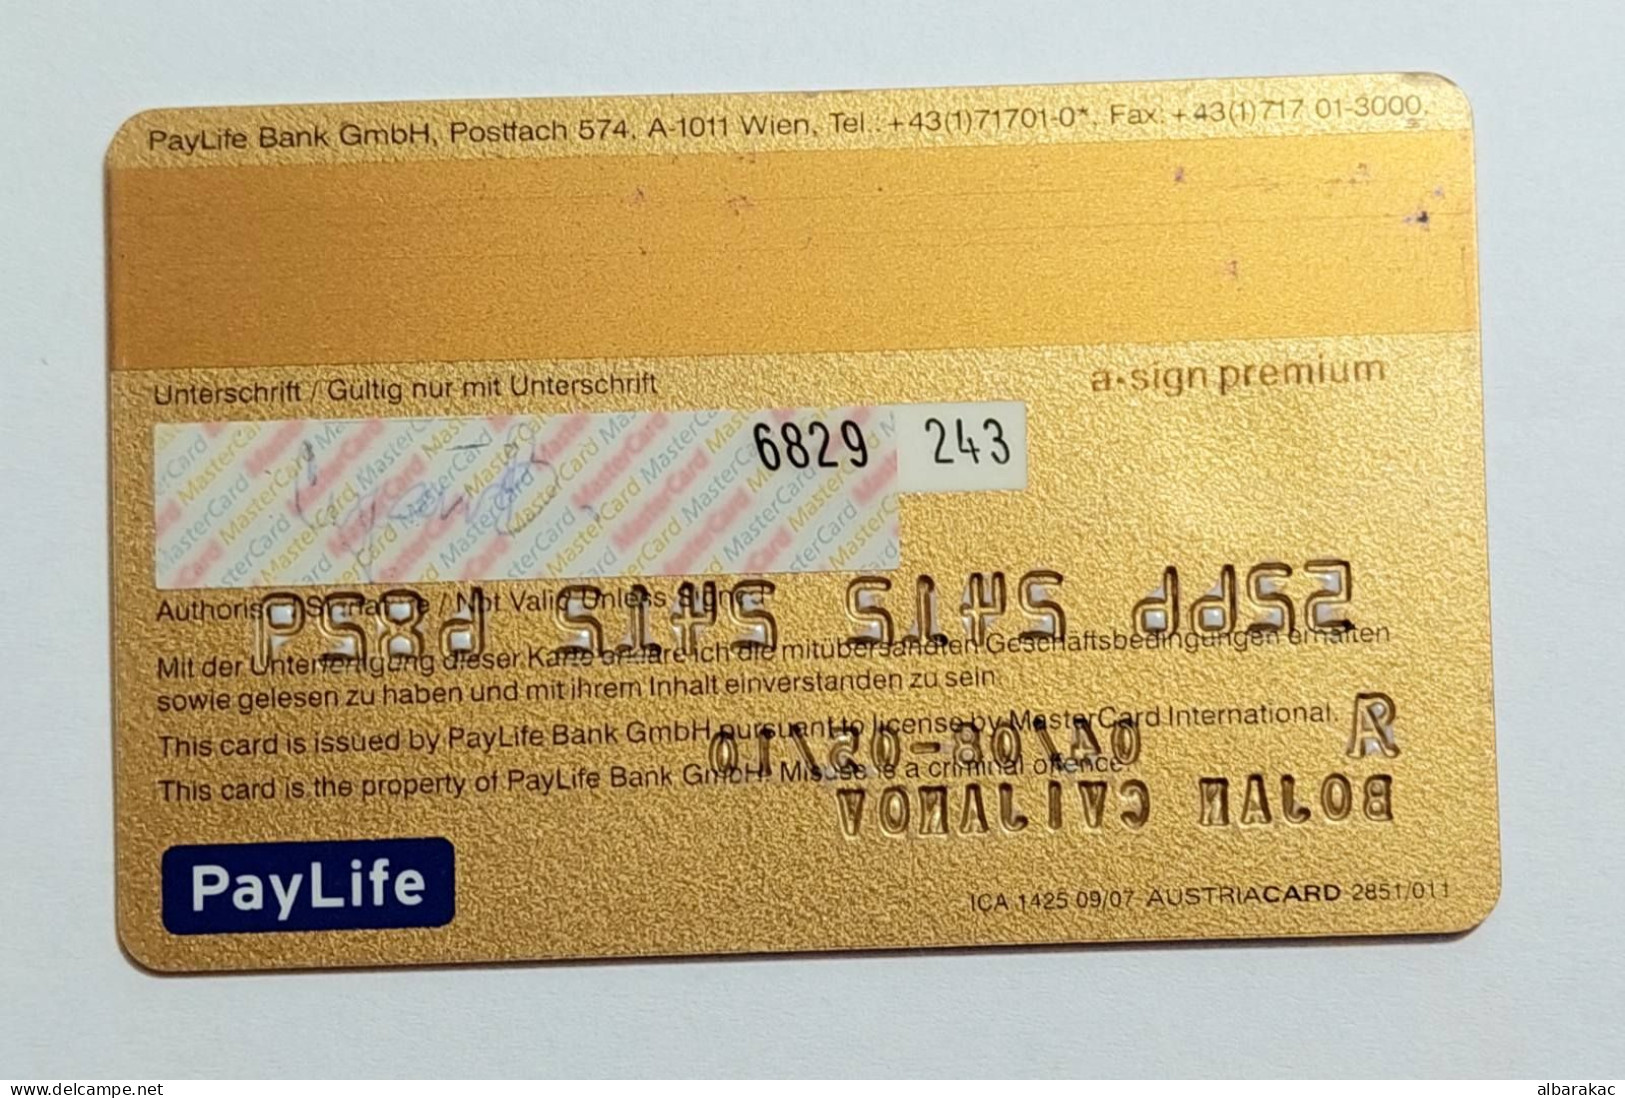 Gold Master Card Erste Bank Austria , A Sign Premium 5/10 - Credit Cards (Exp. Date Min. 10 Years)